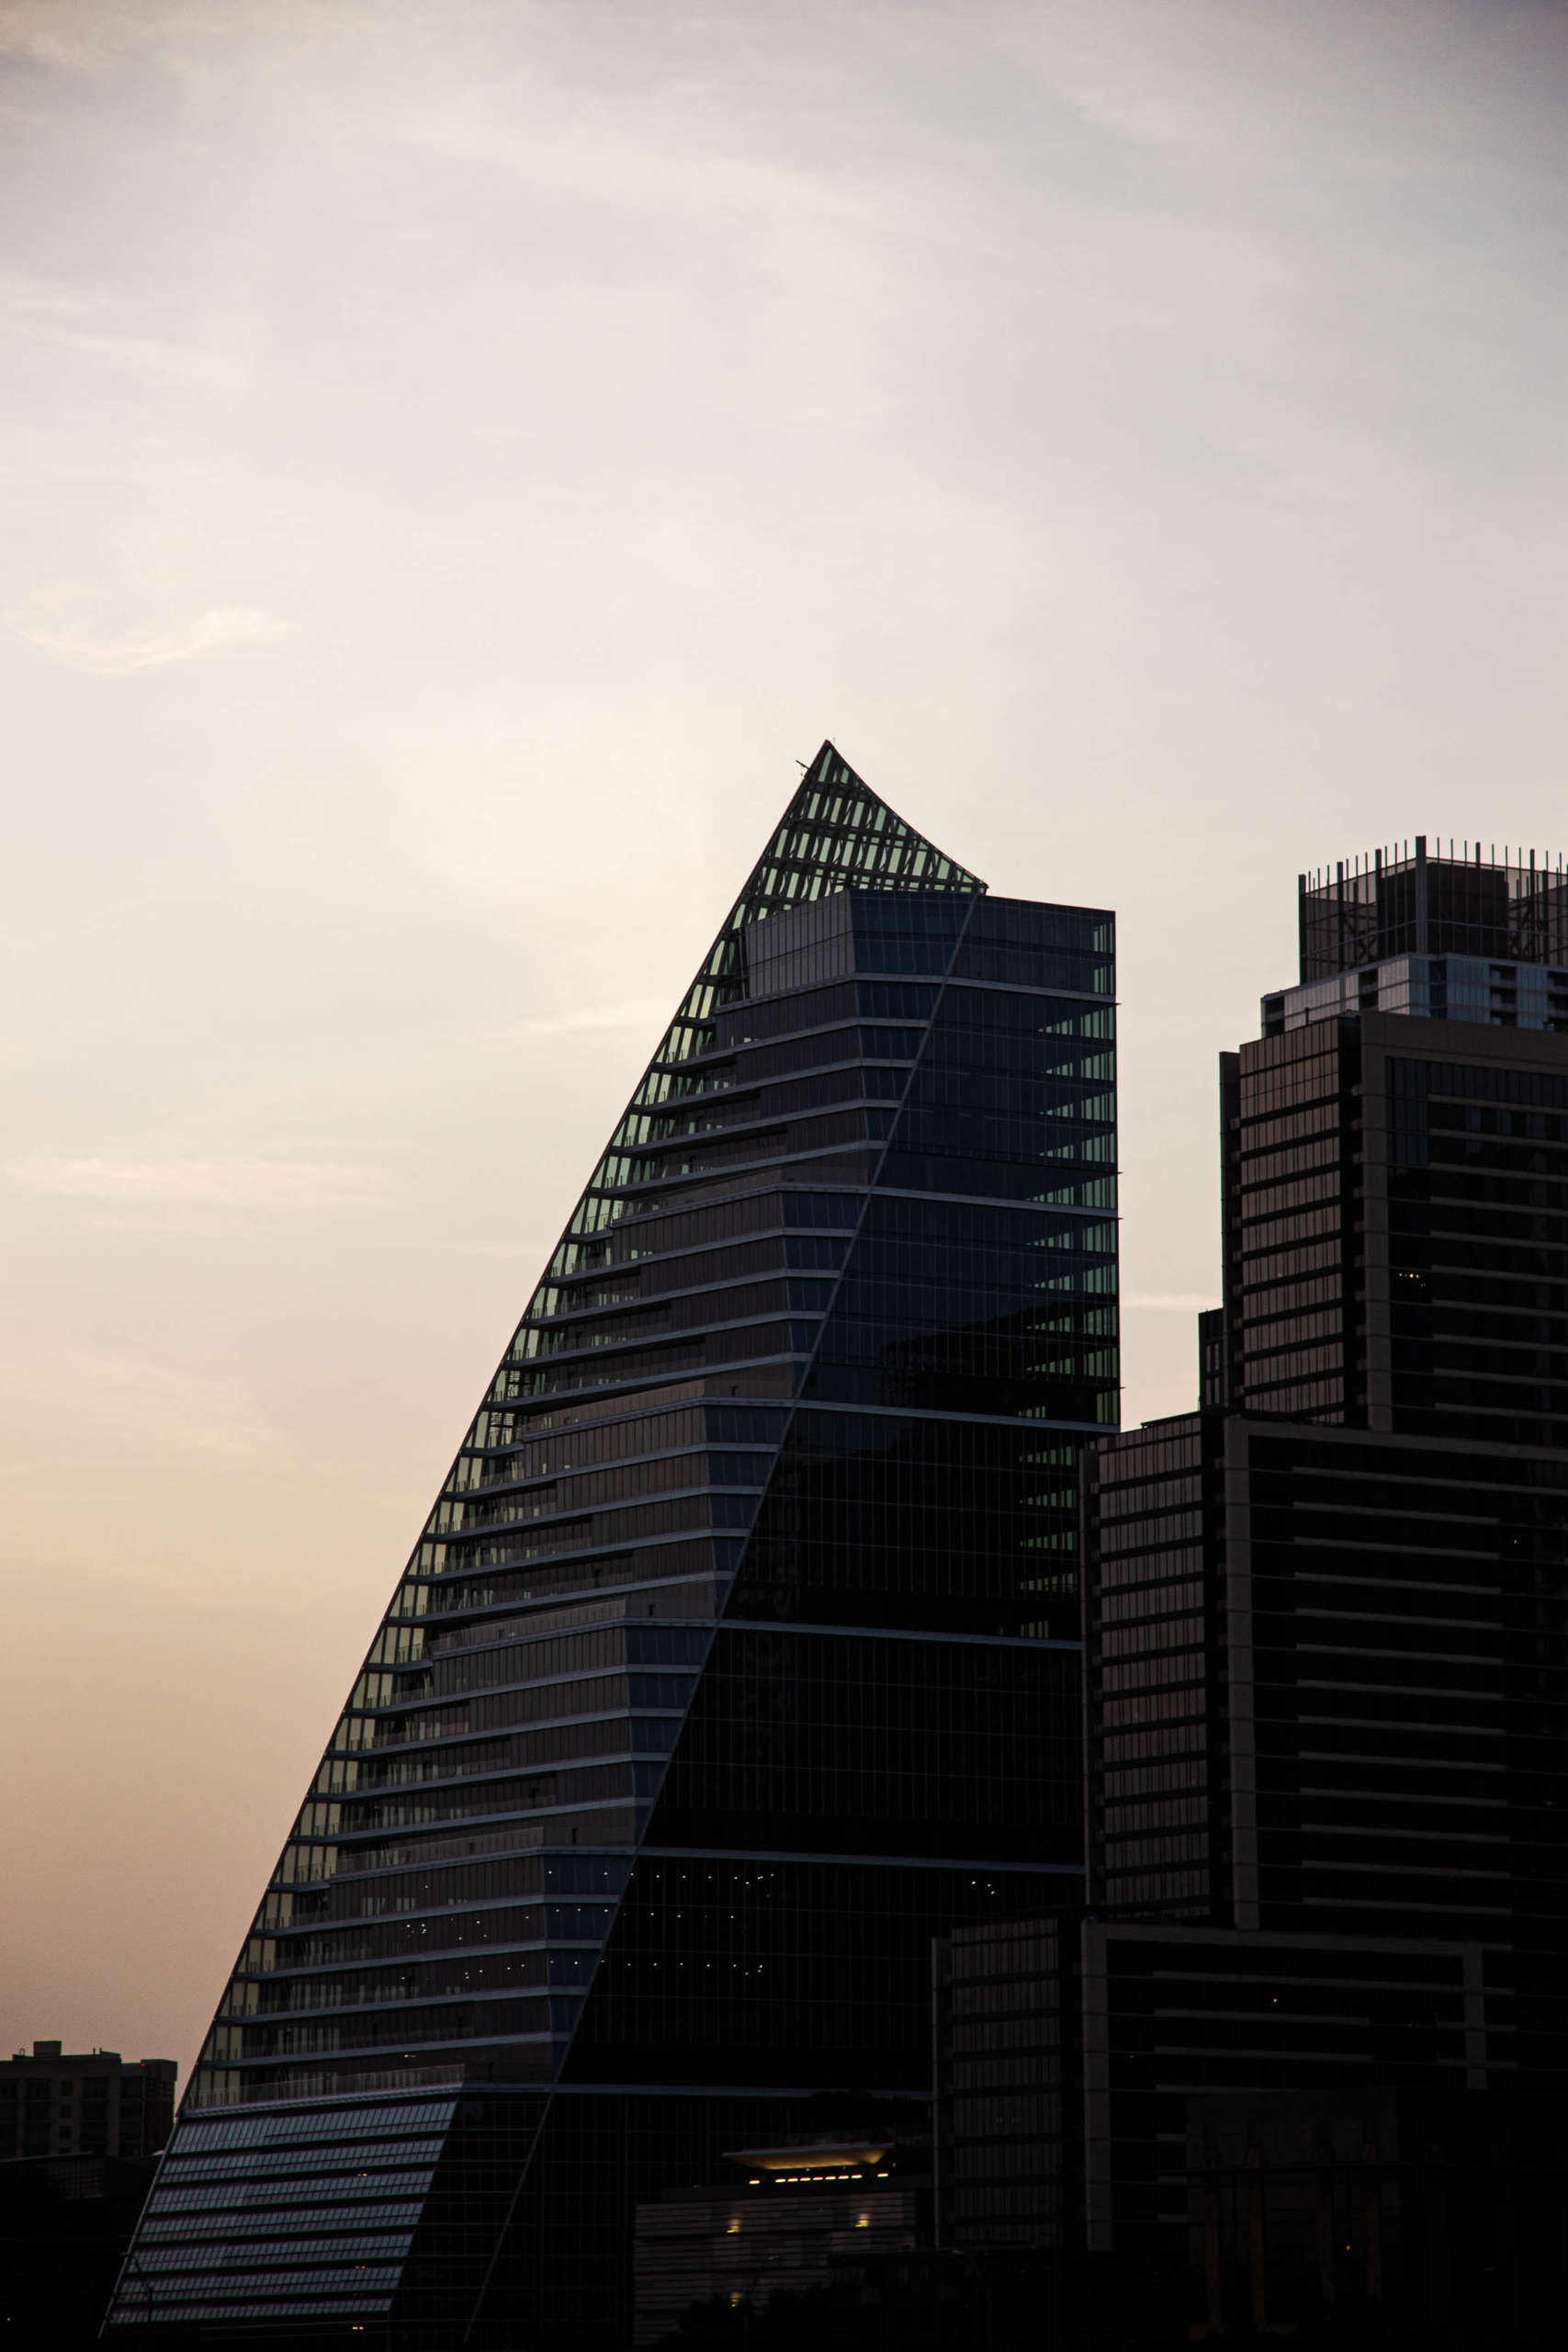 A tall building with a sloping triangular side stands in the dusk, almost silhouetted against a pale orange and blue sky with wispy clouds. More buildings stand behind it, and beneath it is a lighted entrance.